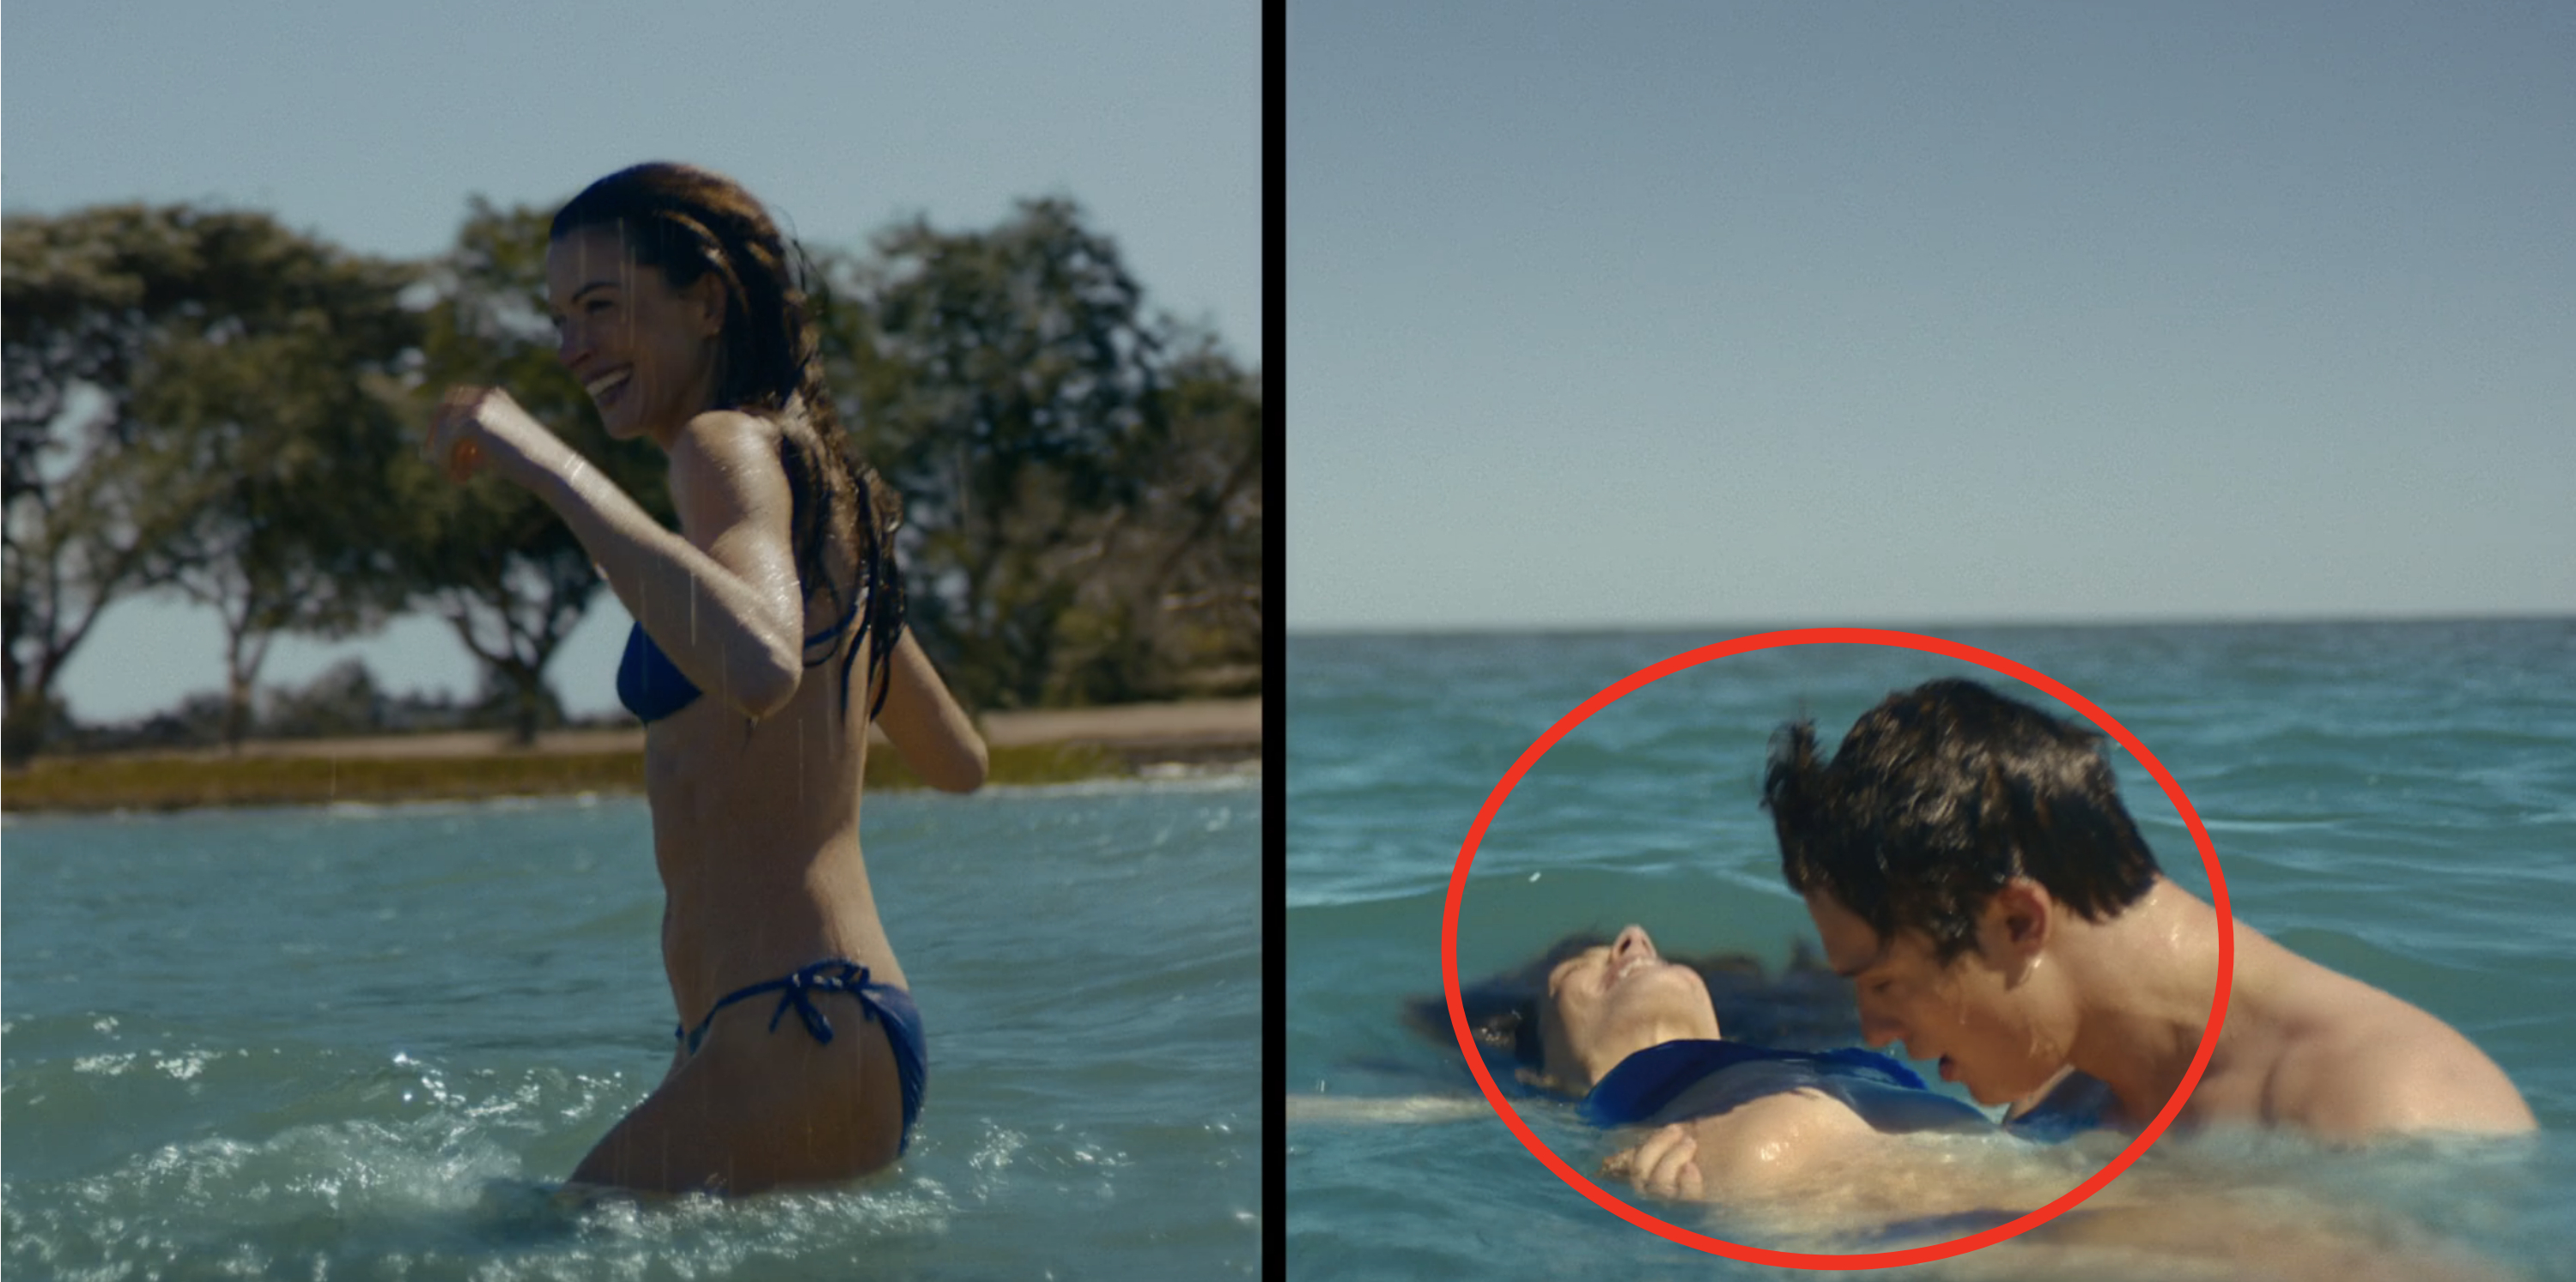 Two scenes from a TV show: first, a woman swims solo, smiling; second, a man and woman embrace in water